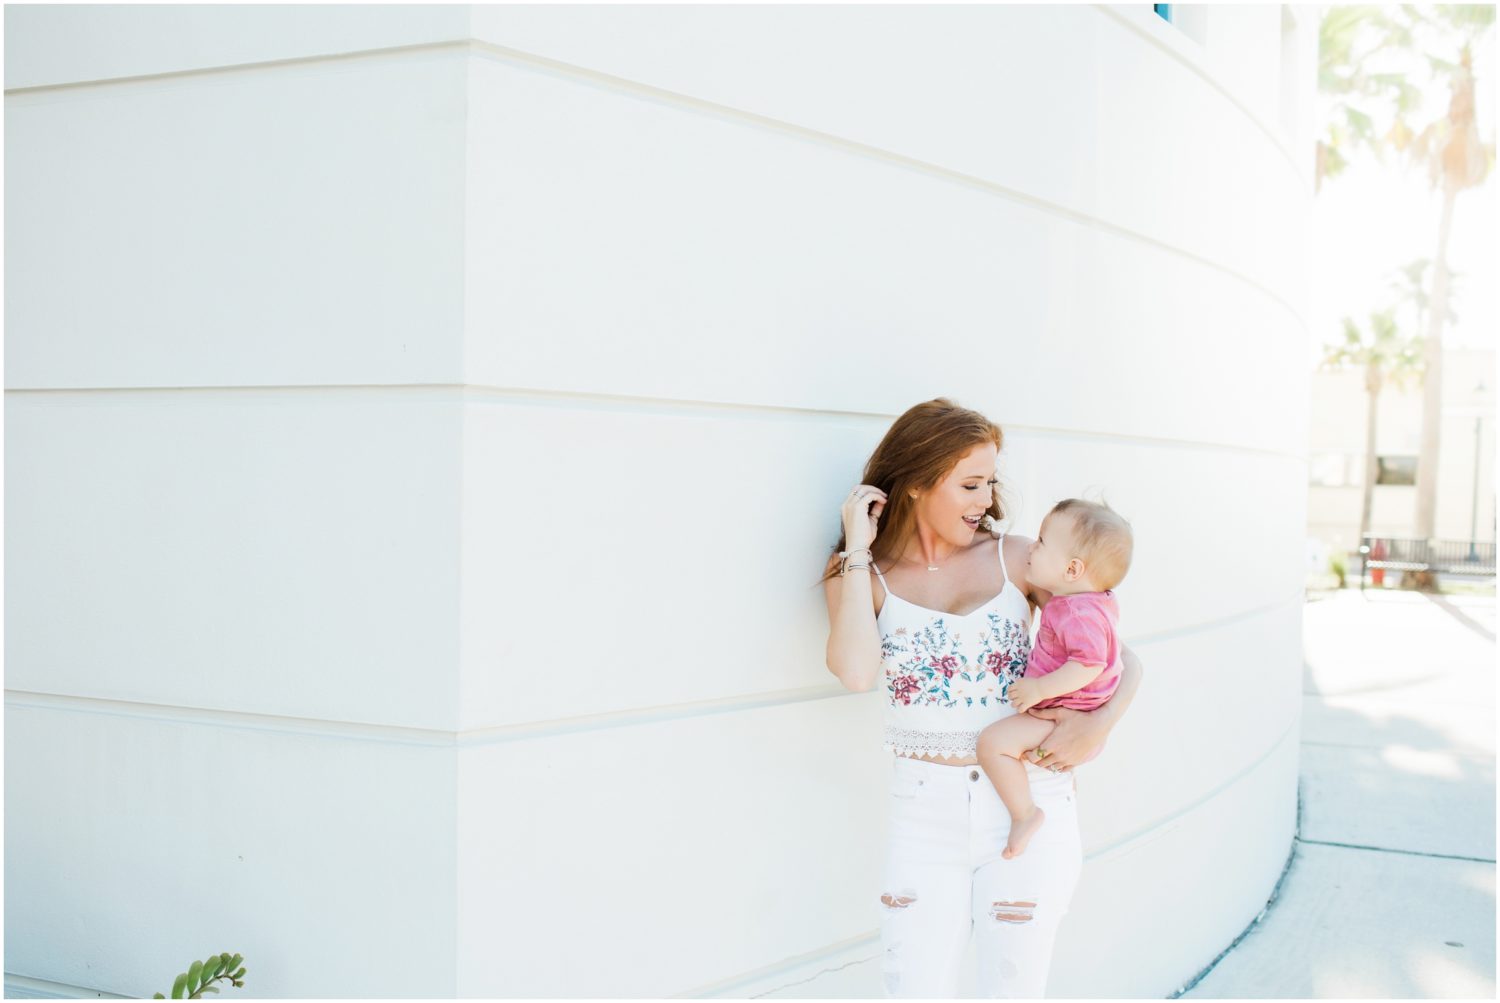 Jacksonville Lifestyle Photographers, Brooke Images, Mommy and Me Session, Kids Session, Family Session